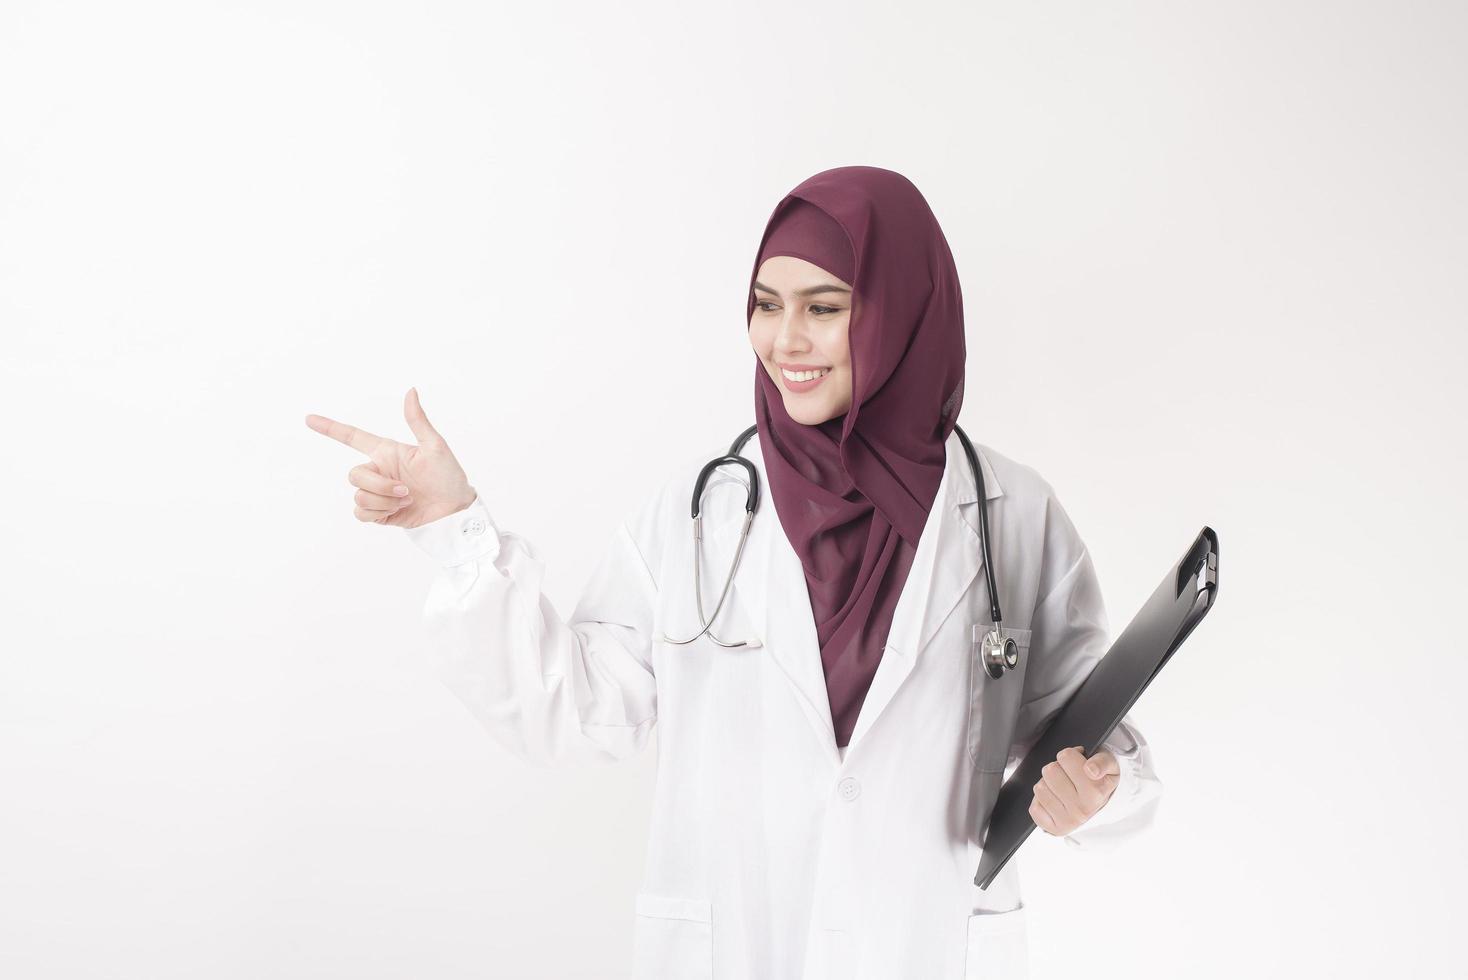 Beautiful woman doctor with hijab portrait on white background photo